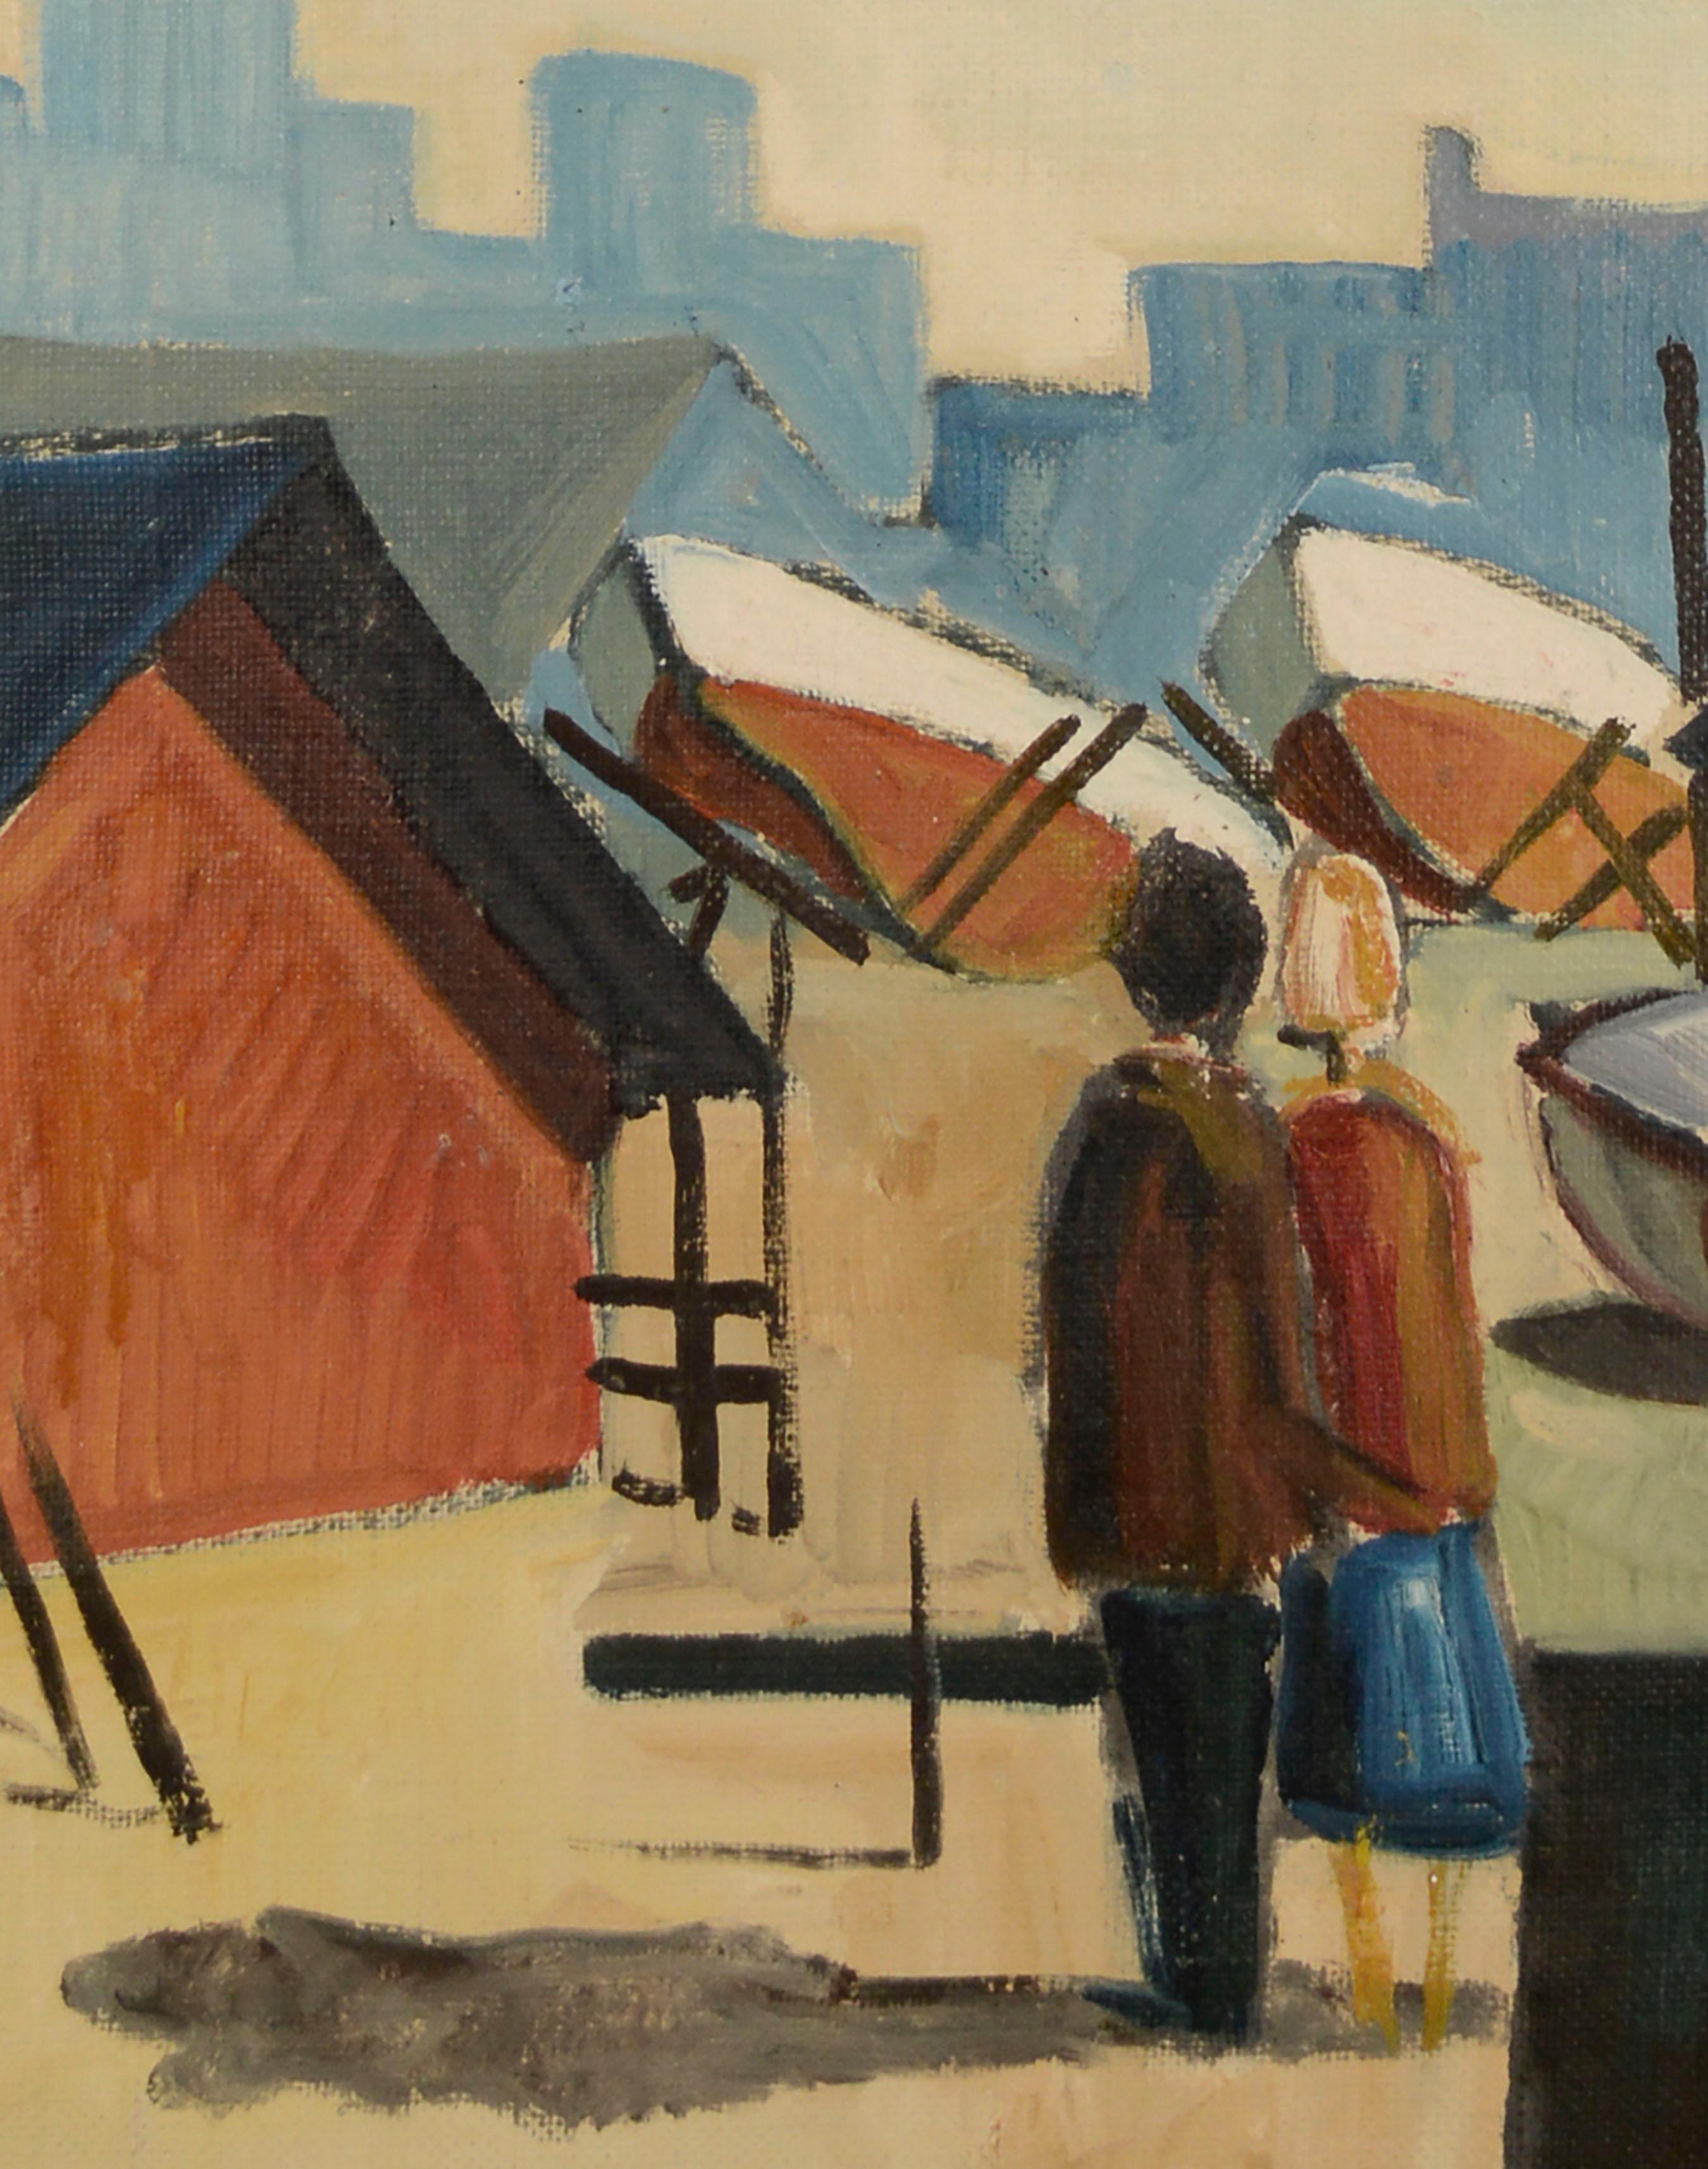 Beautiful mid century modern figurative landscape of a couple standing in an urban harbor by Leon, an unknown artist. (American, 20th C). The two figures gaze out past small rowboats at the city skyline. The artist distills down the shapes of the